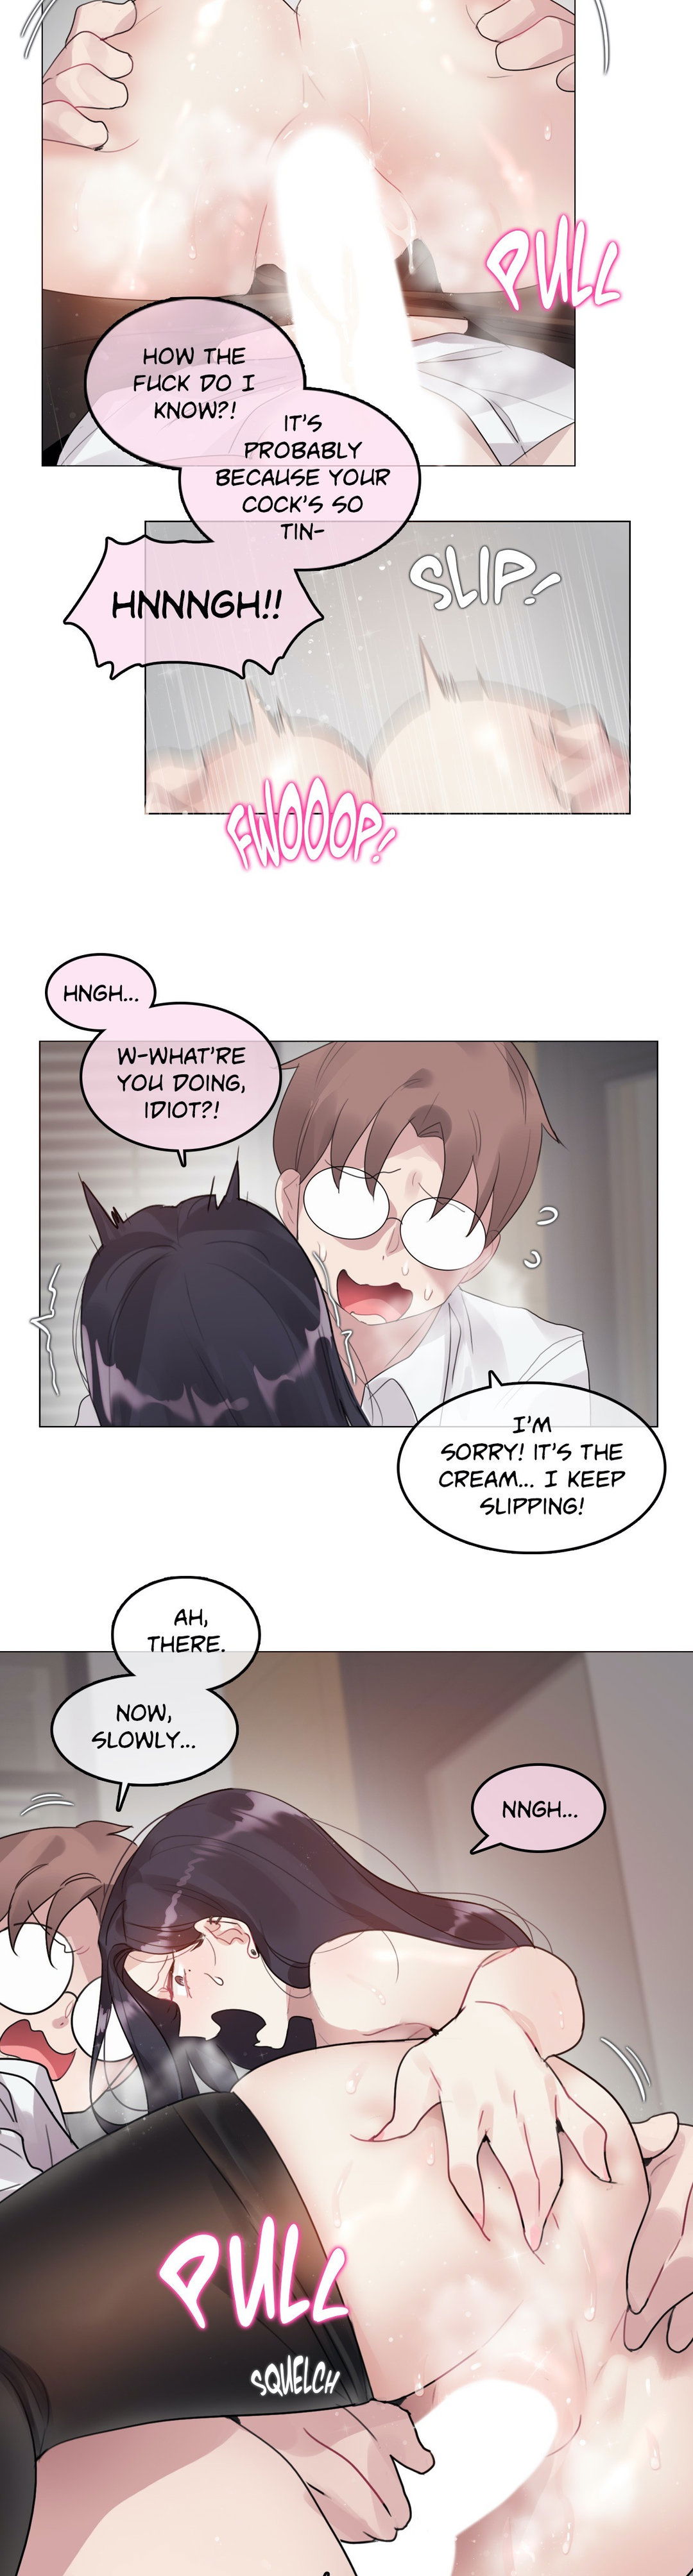 a-perverts-daily-life-chap-108-1